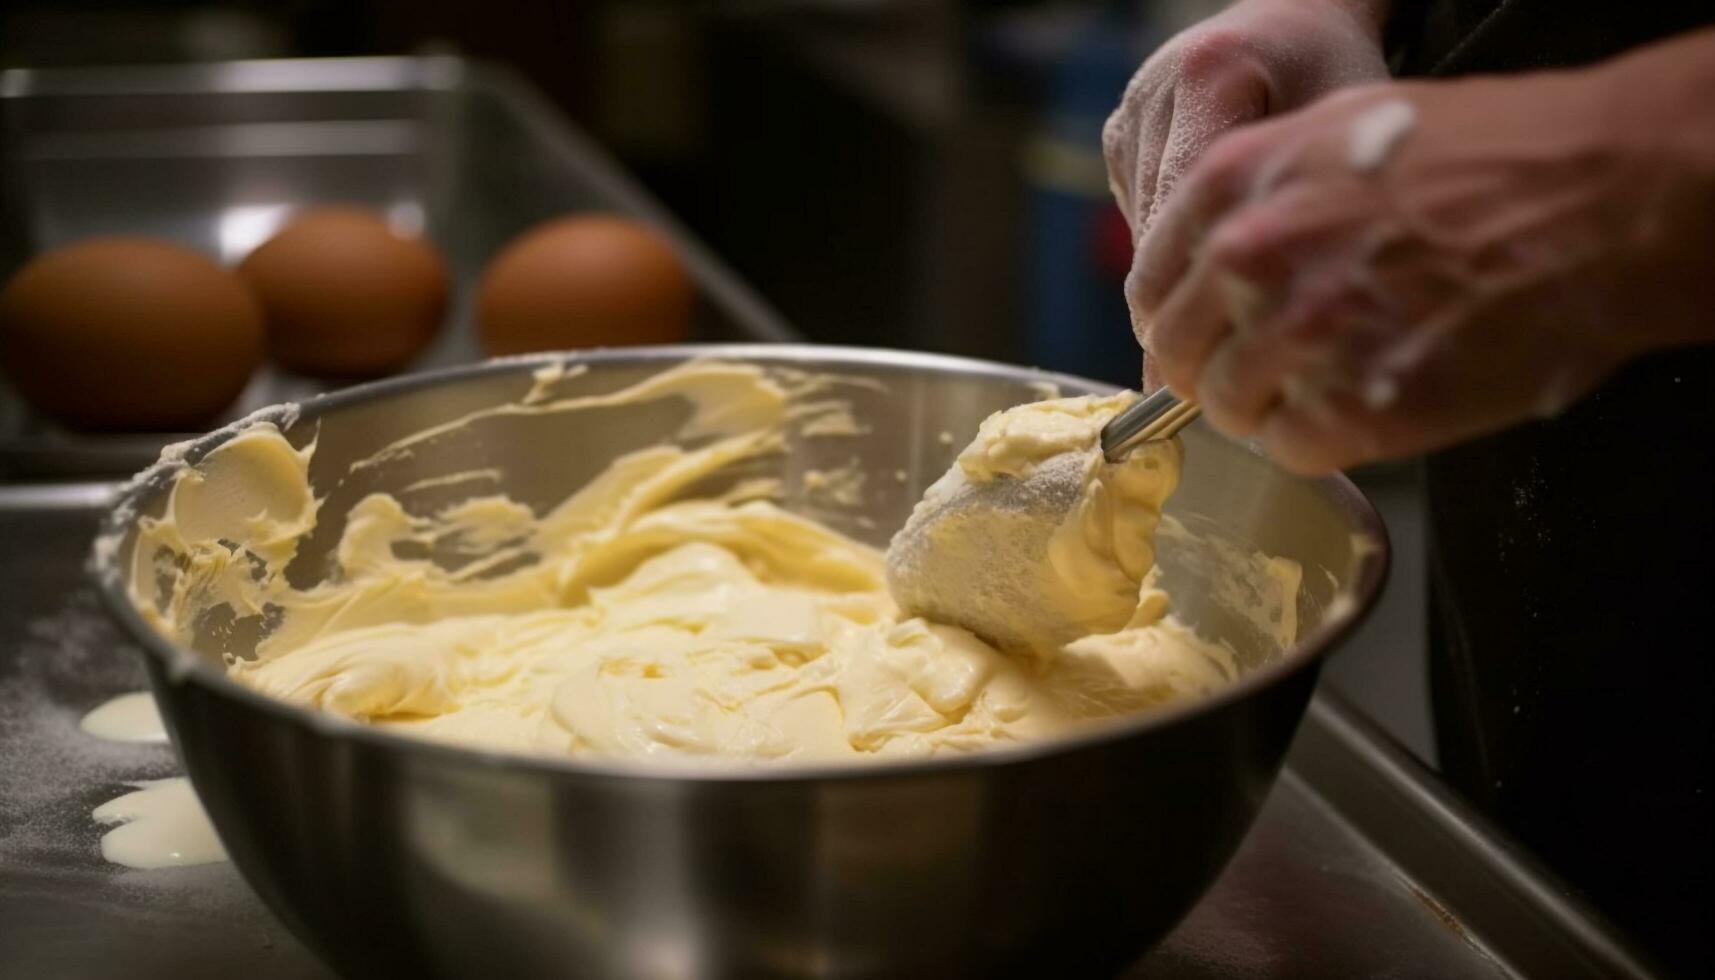 A person prepares homemade dough in a domestic kitchen   generated by AI photo